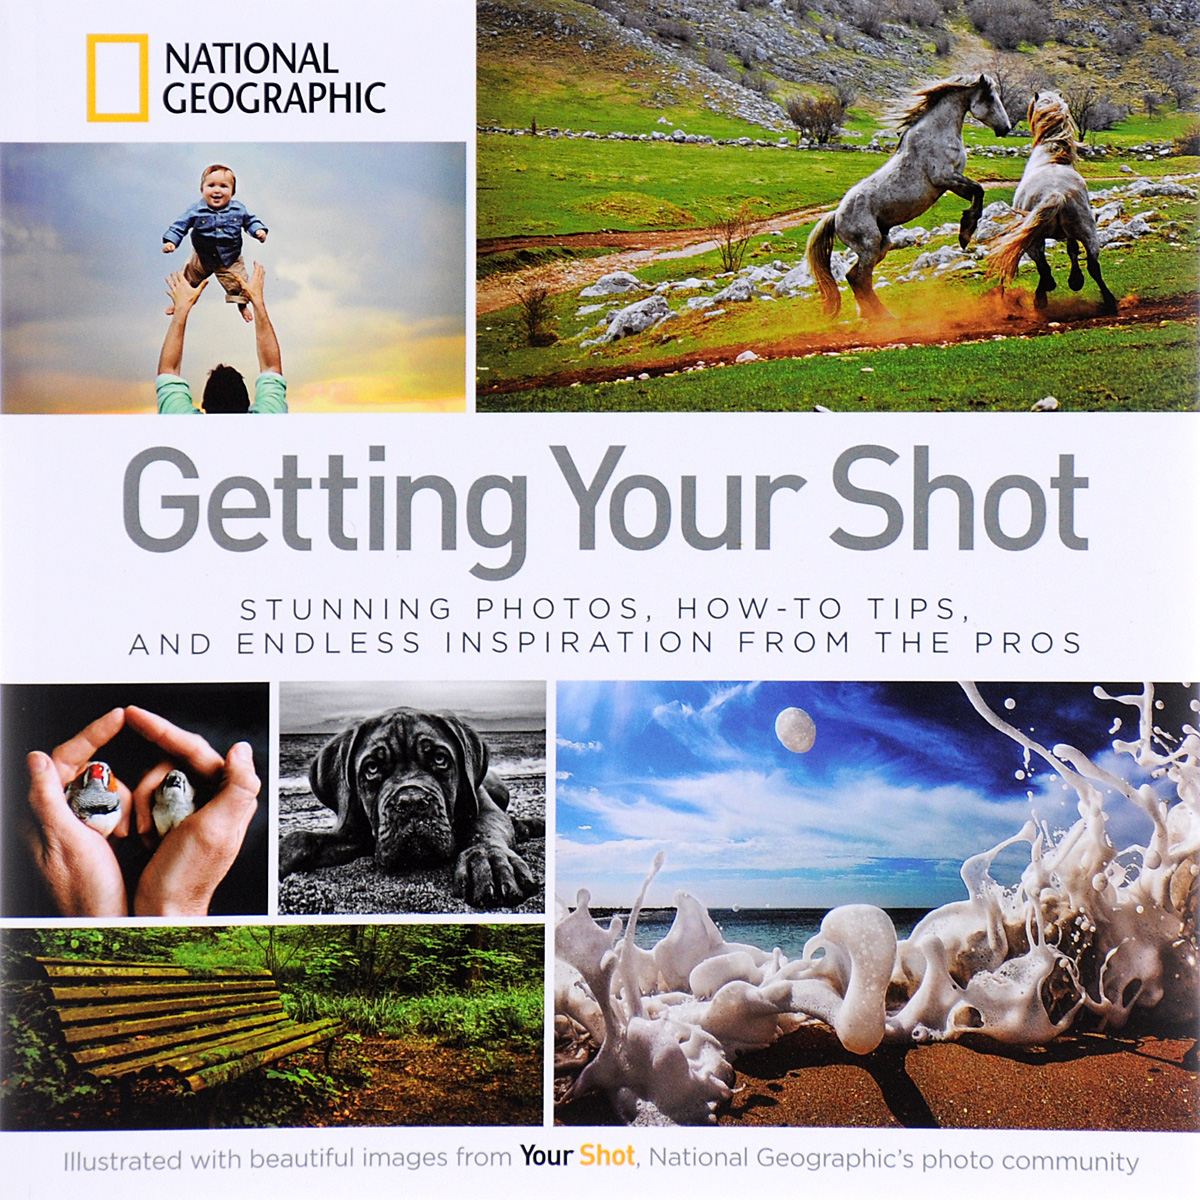 Getting Your Shot: Stunning Photos, How-to Tips, and Endless Inspiration From the Pros